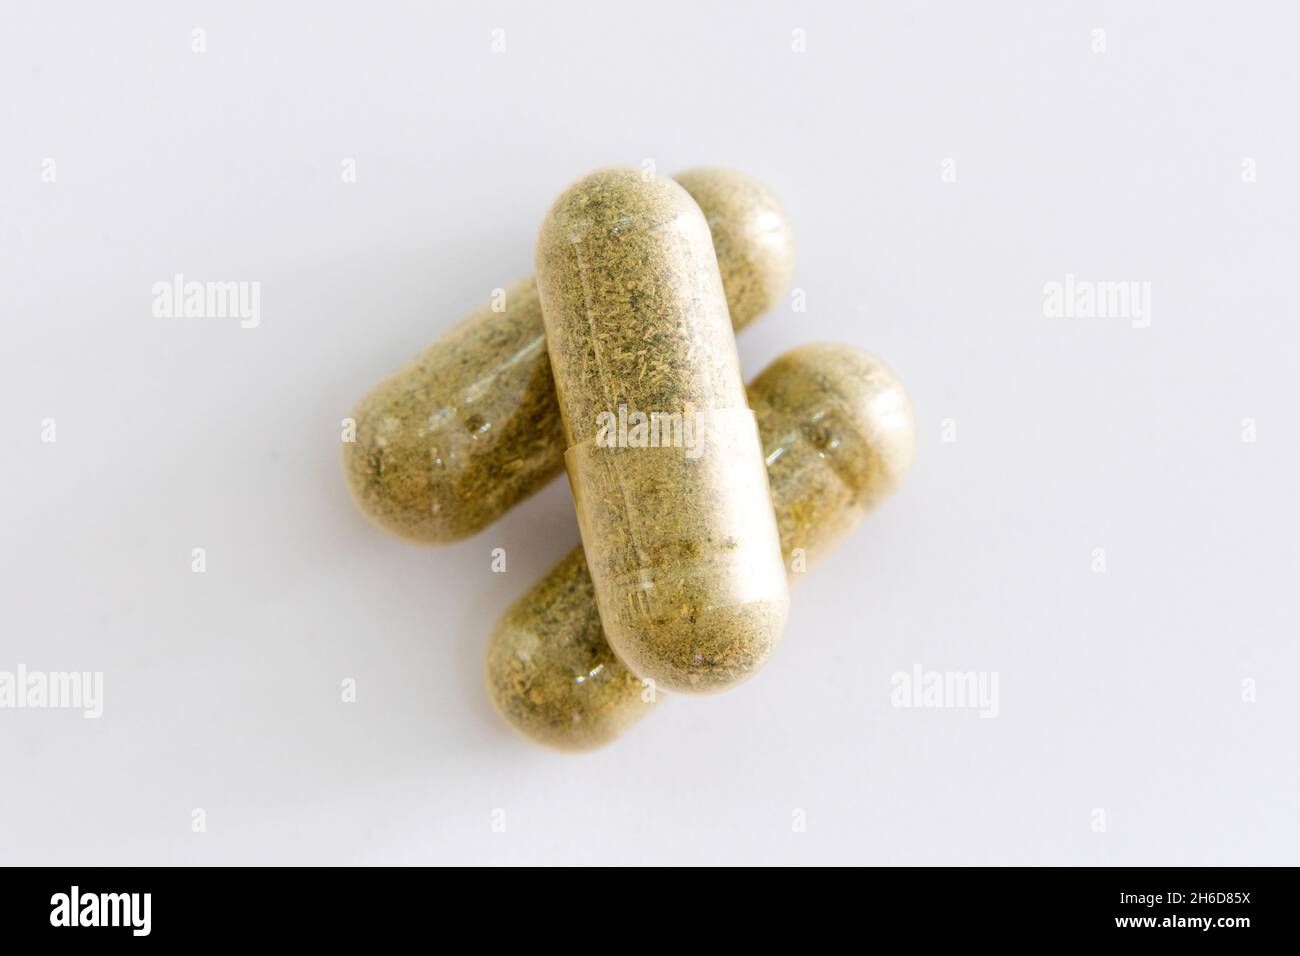 Top view of pill capsule on white background. Herb for treatment coronavirus or covid19. Drug and medicine concept. Stock Photo